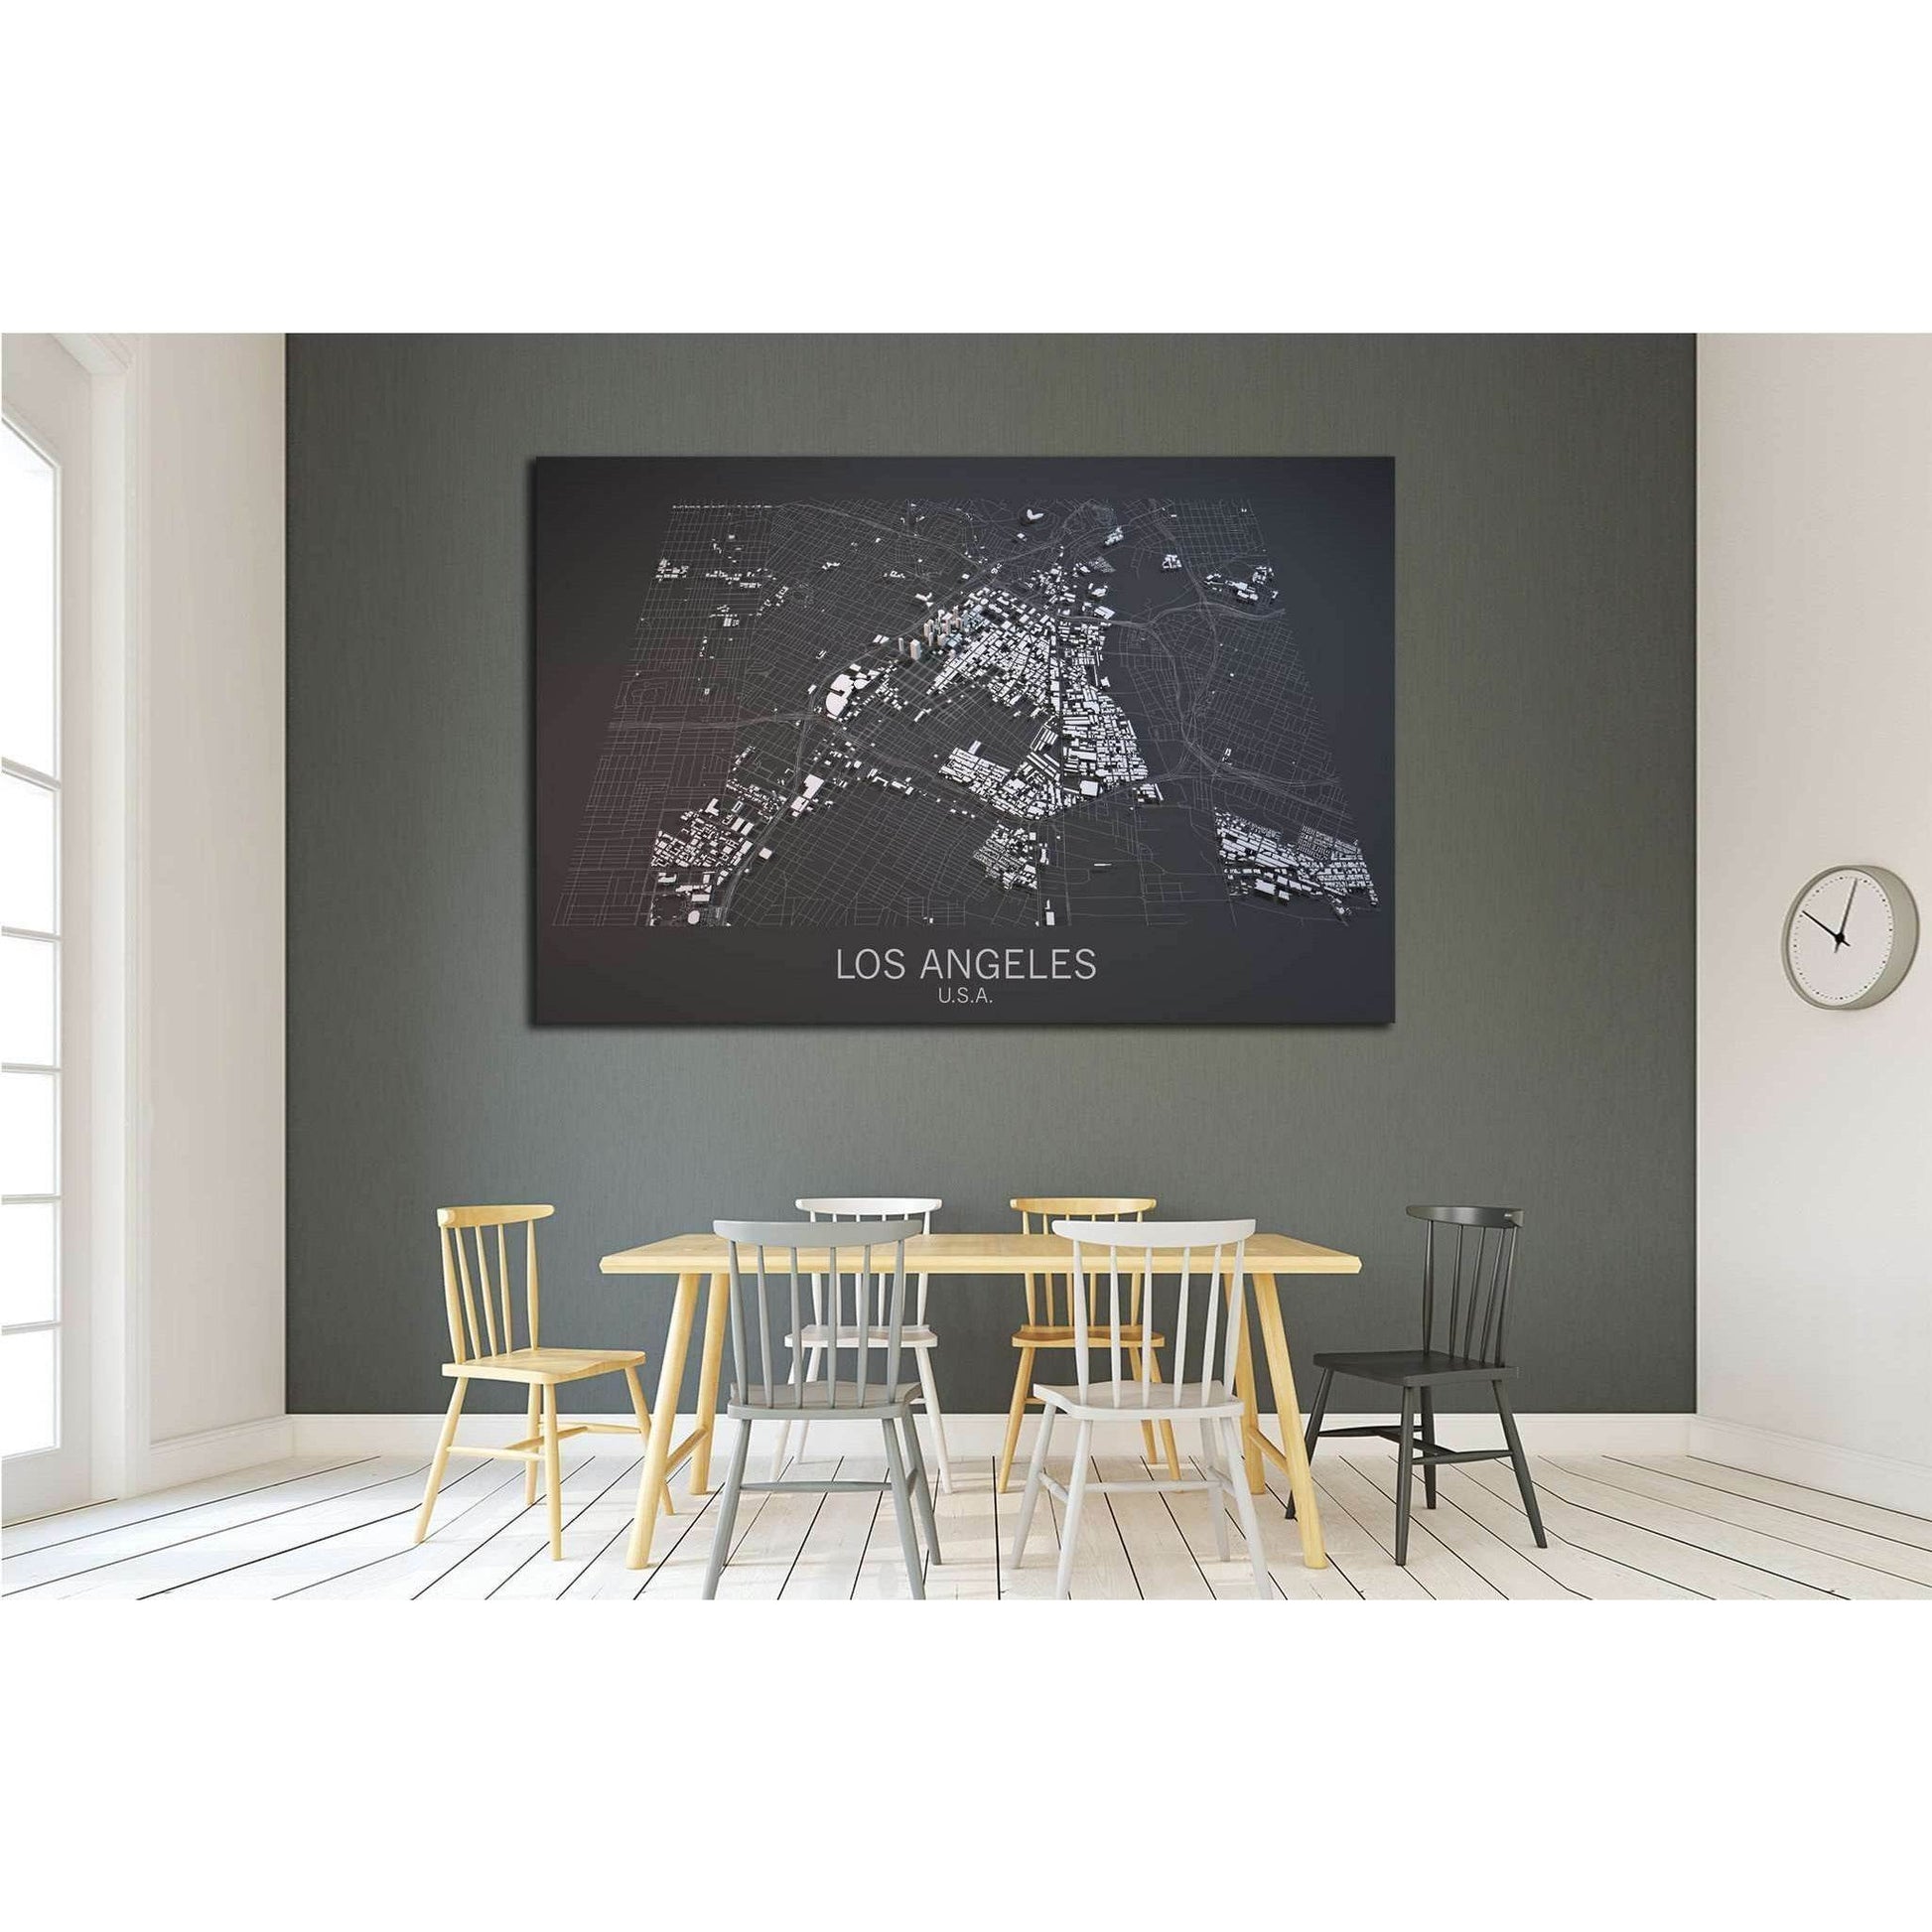 Los Angeles, LA Map Blueprint Canvas Art PrintDecorate your walls with a stunning Los Angeles Map Canvas Art Print from the world's largest art gallery. Choose from thousands of Map Blueprint artworks with various sizing options. Choose your perfect art p